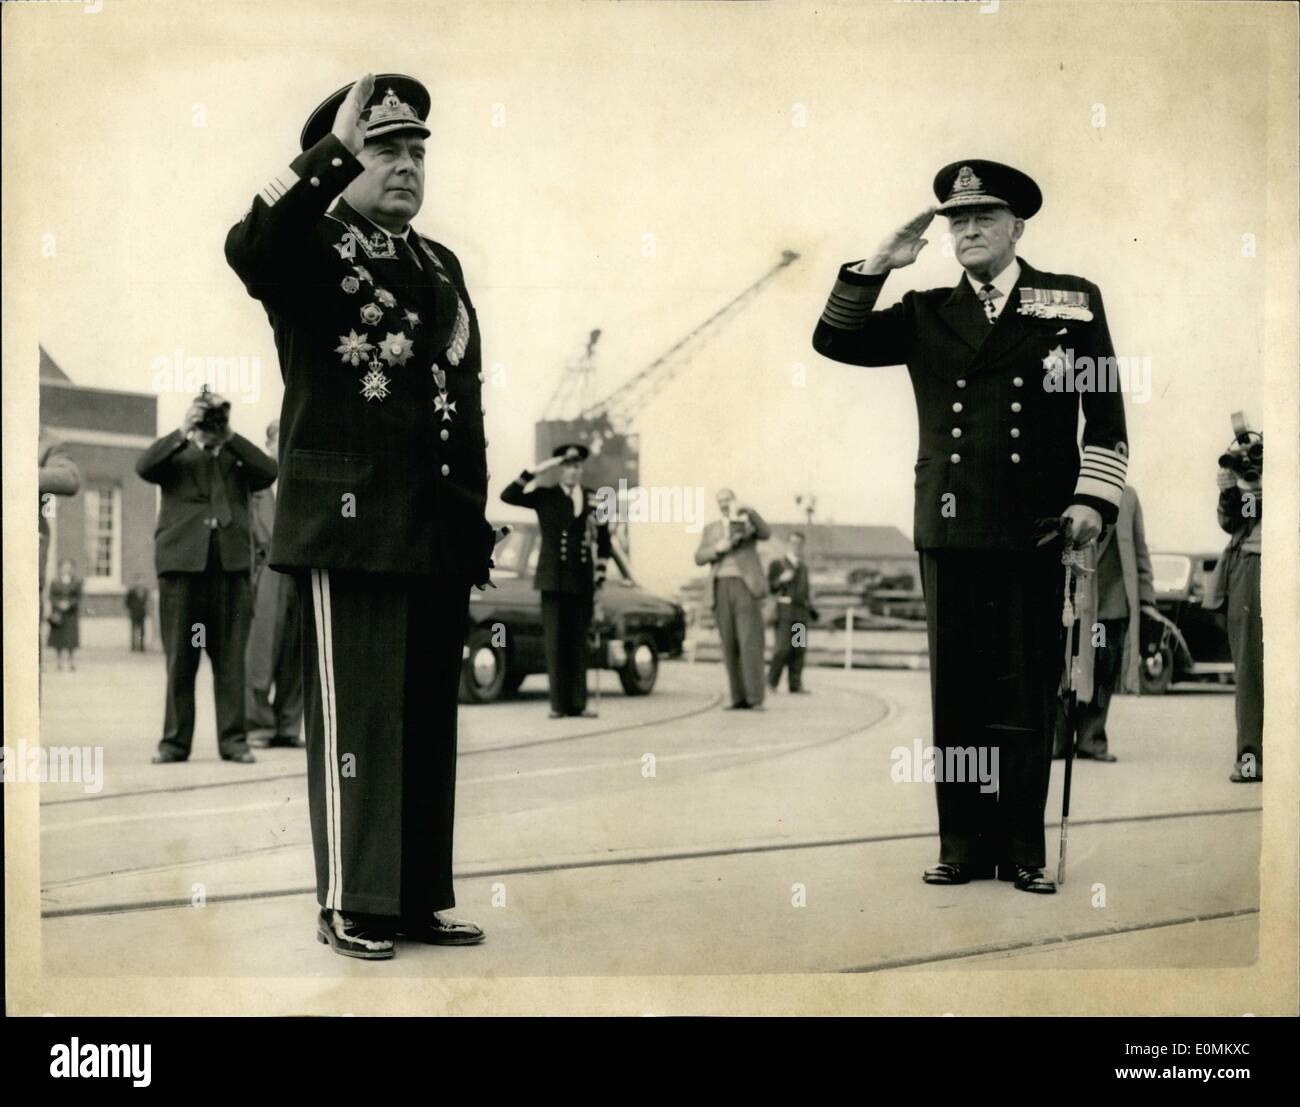 Oct. 10, 1955 - Russian Warships On Official Visit To Britain Admiral Golovko Salutes: Six Russian warships arrived in the English Channel today on a five day goodwill visit to Portsmouth. Admiral Golovk came ashore and was greeted and was escorted over H.M.S Victory. Photo shows: Admiral Sir George Creasy looks on as Admiral Golovko Salutes the guard of Honour during the ceremonies at Portsmouth today. Stock Photo